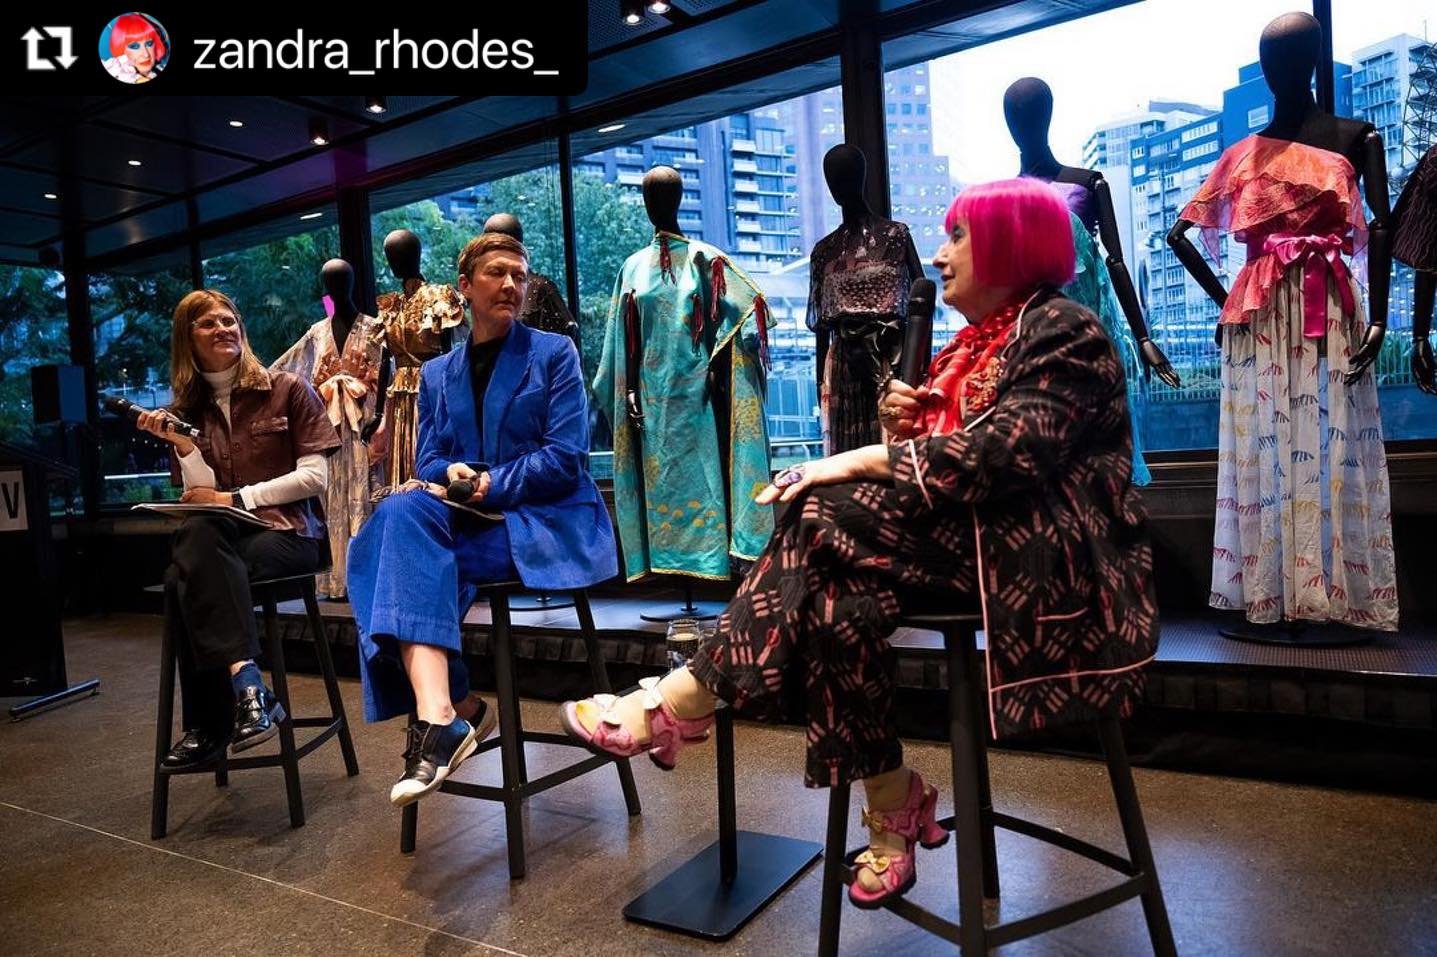 Apart from the hats and headpieces and teaching at @ravensbourneuk, I&rsquo;ve also been moonlighting at the Zandra Rhodes&rsquo; Foundation; sorting through her vast archive of.. everything she&rsquo;s ever done! 

We have been working with universi